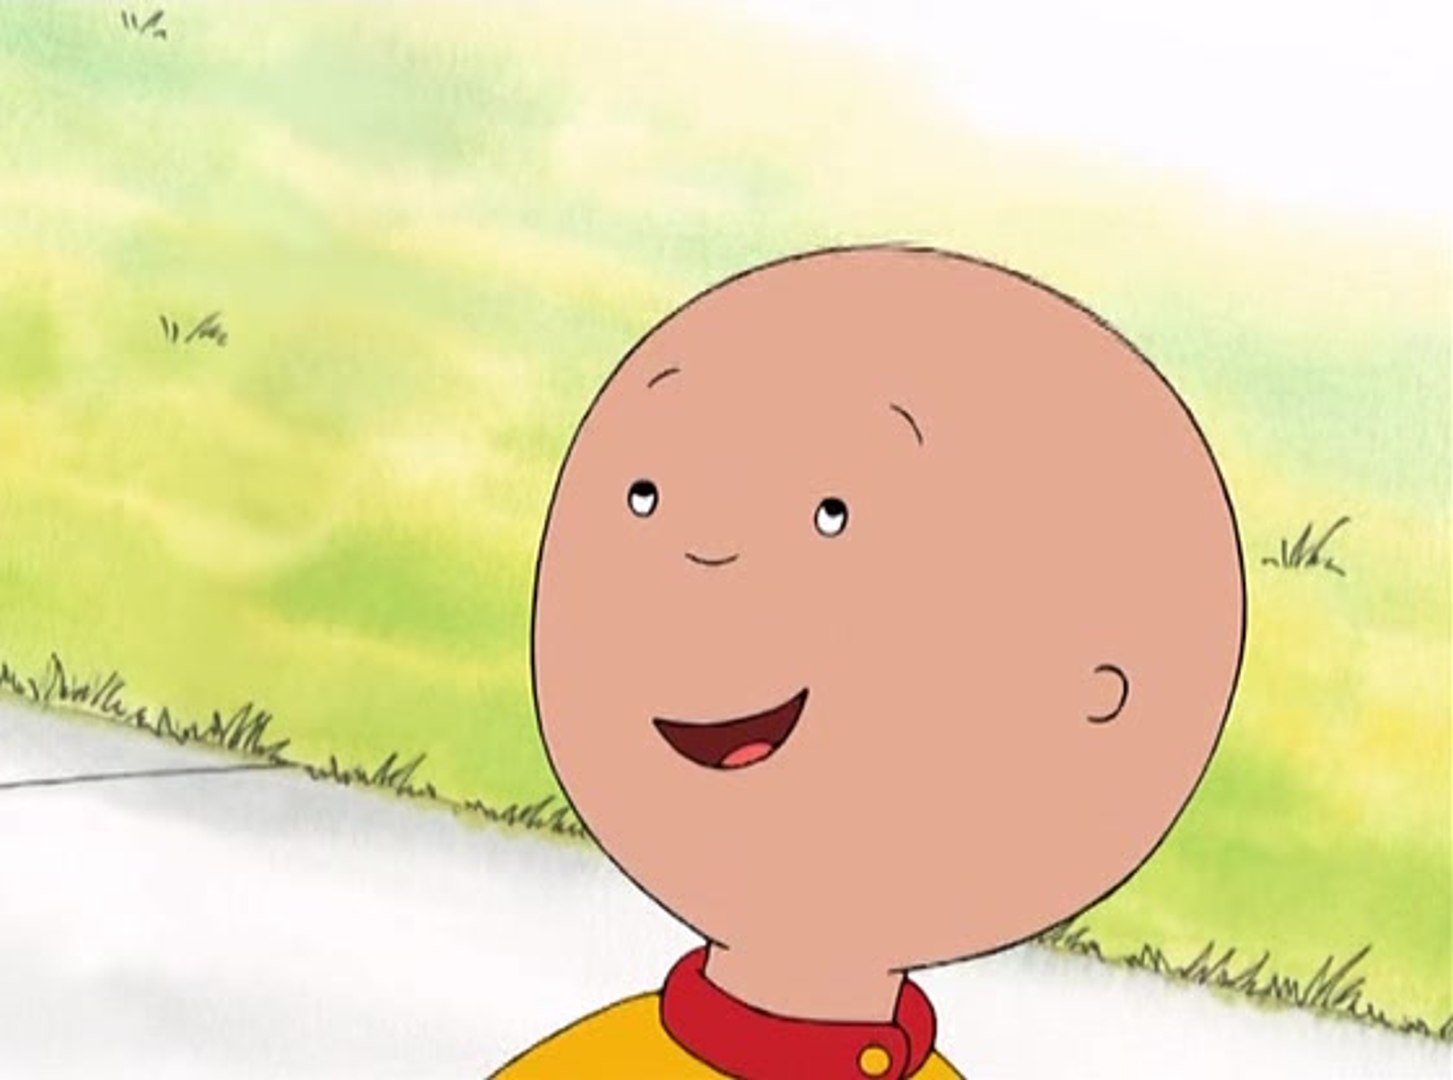 Caillou Episode 6 All Wet Season 6 Complete Video Dailymotion